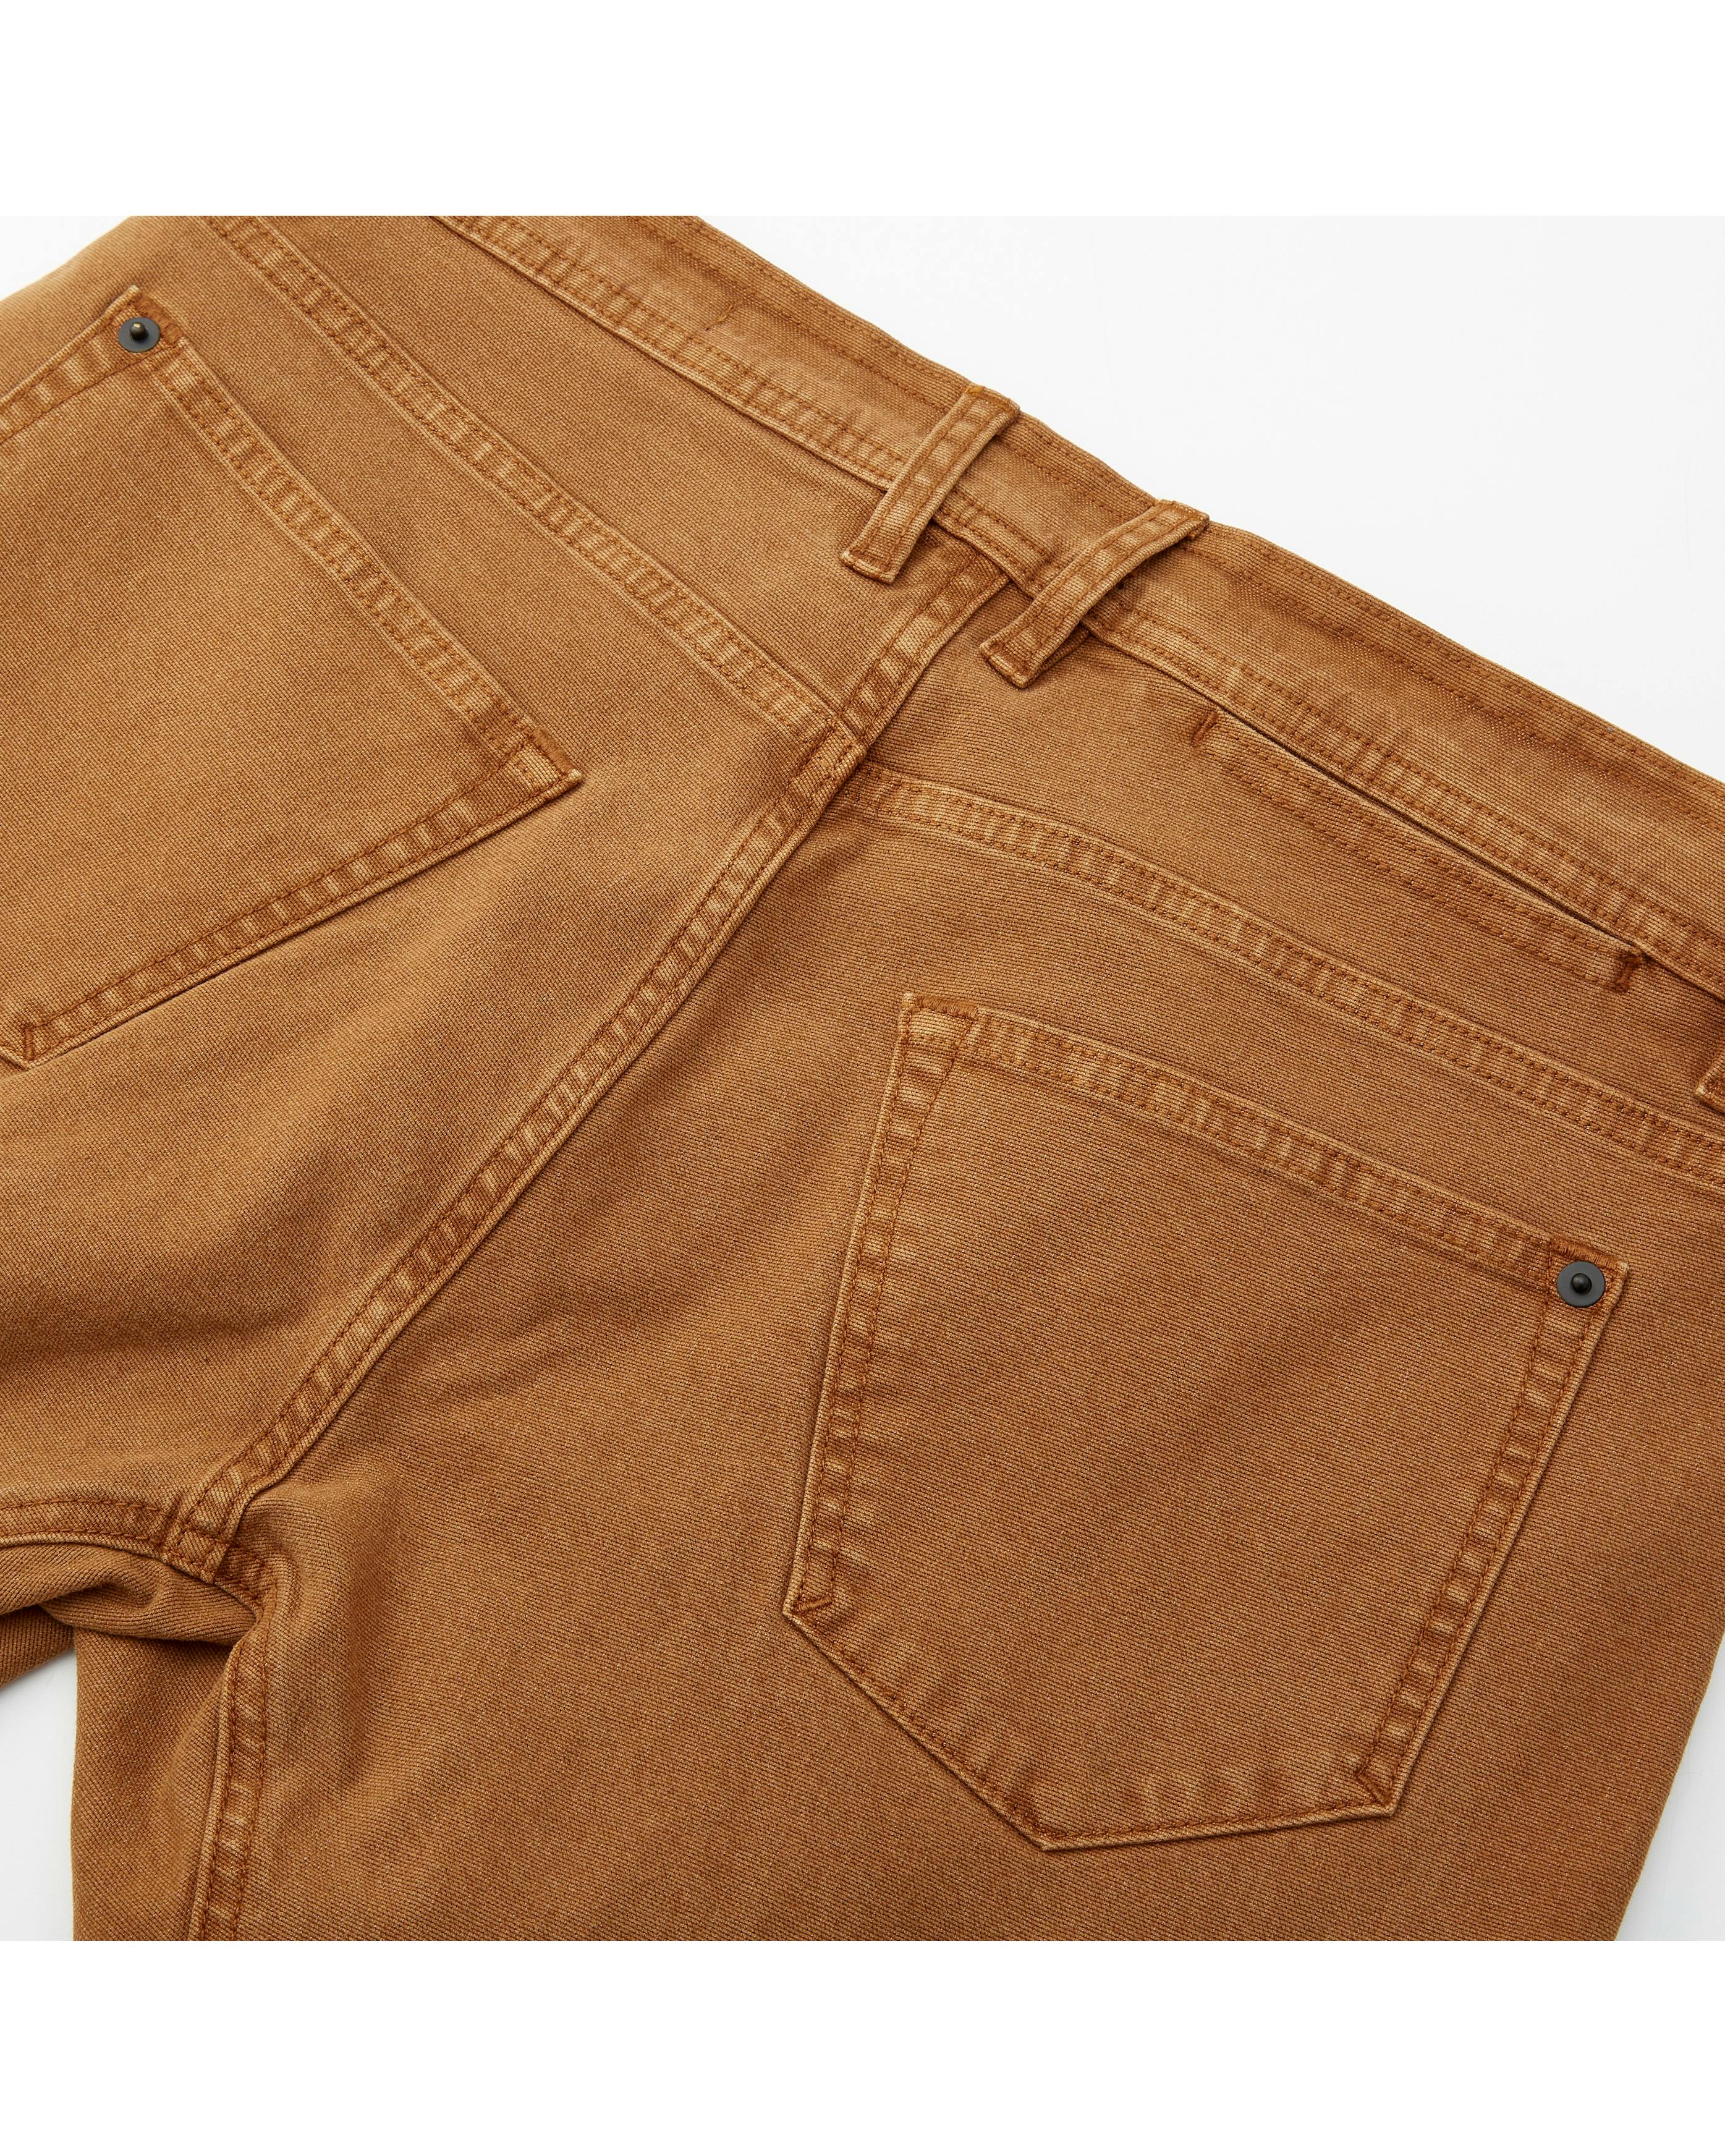 Proof Rover Double-Knee Work Pant - Slim - Canyon | Work Pants | Huckberry